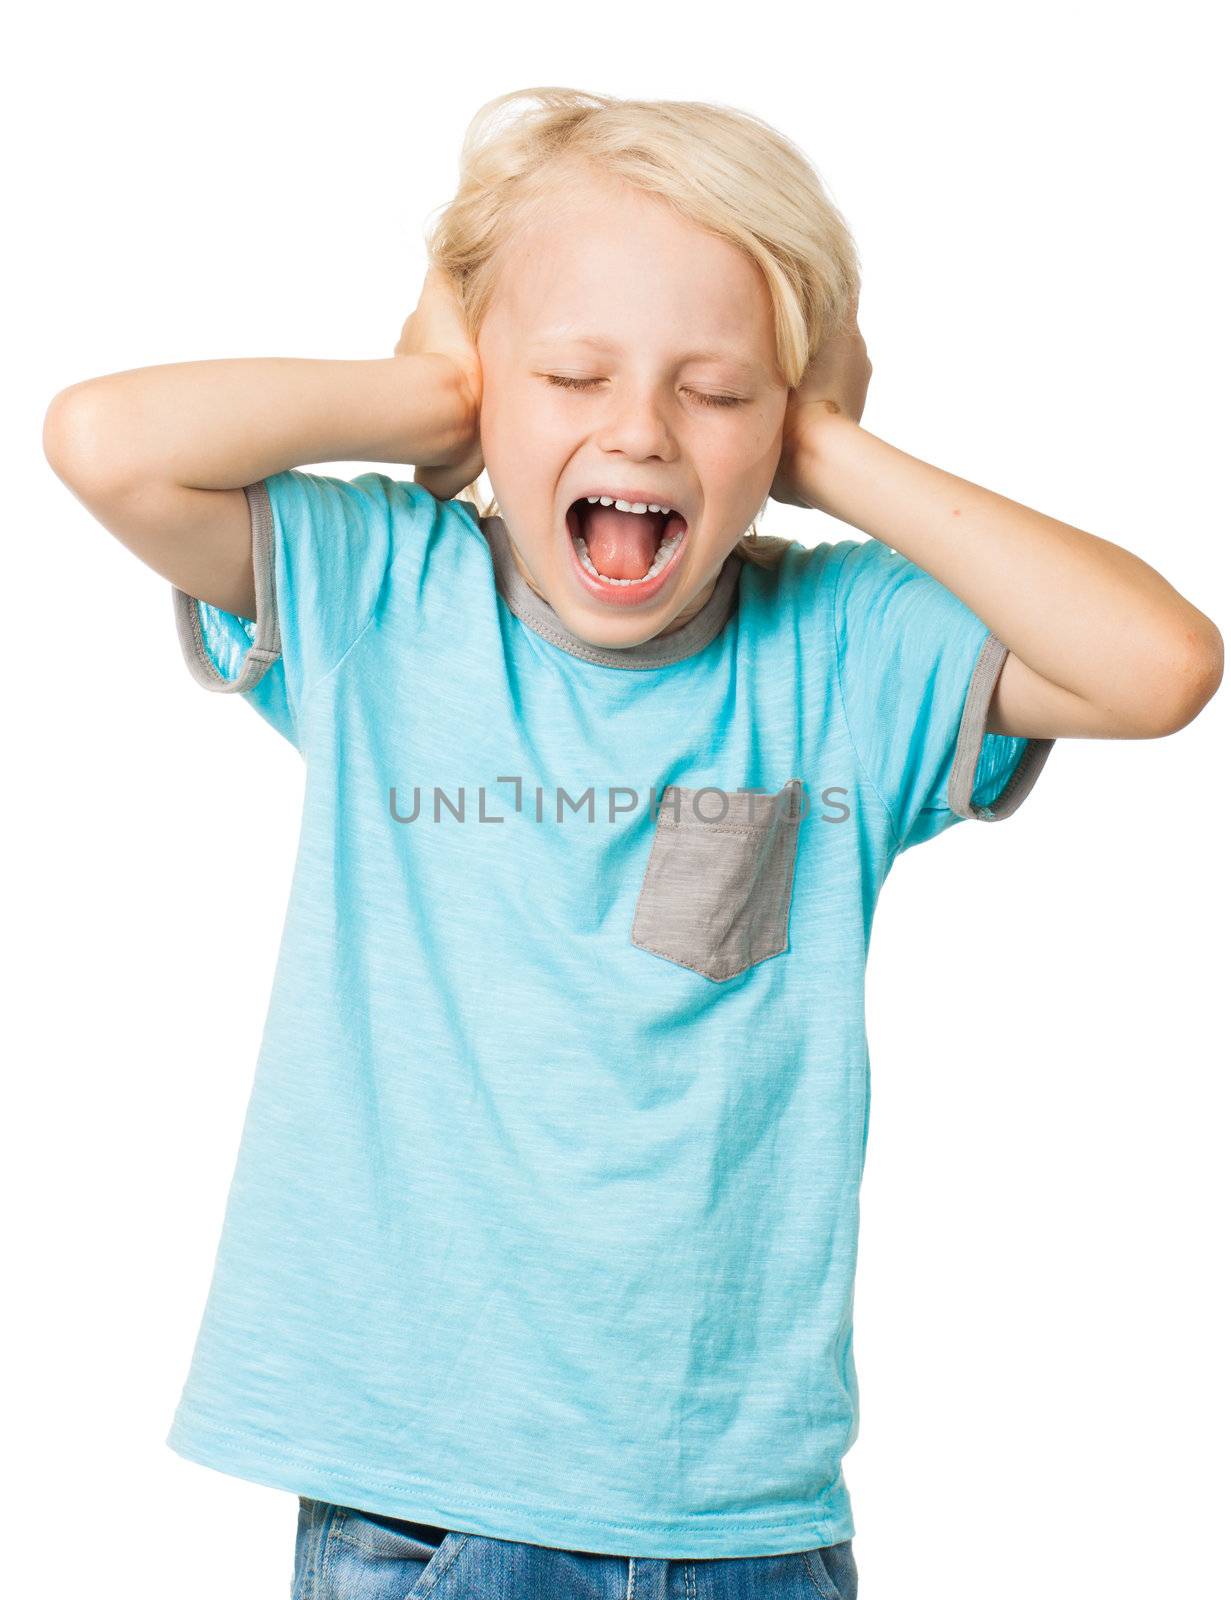 A young distressed young boy screams with his eyes shut and covers his ears with his hands. Isolated on white.